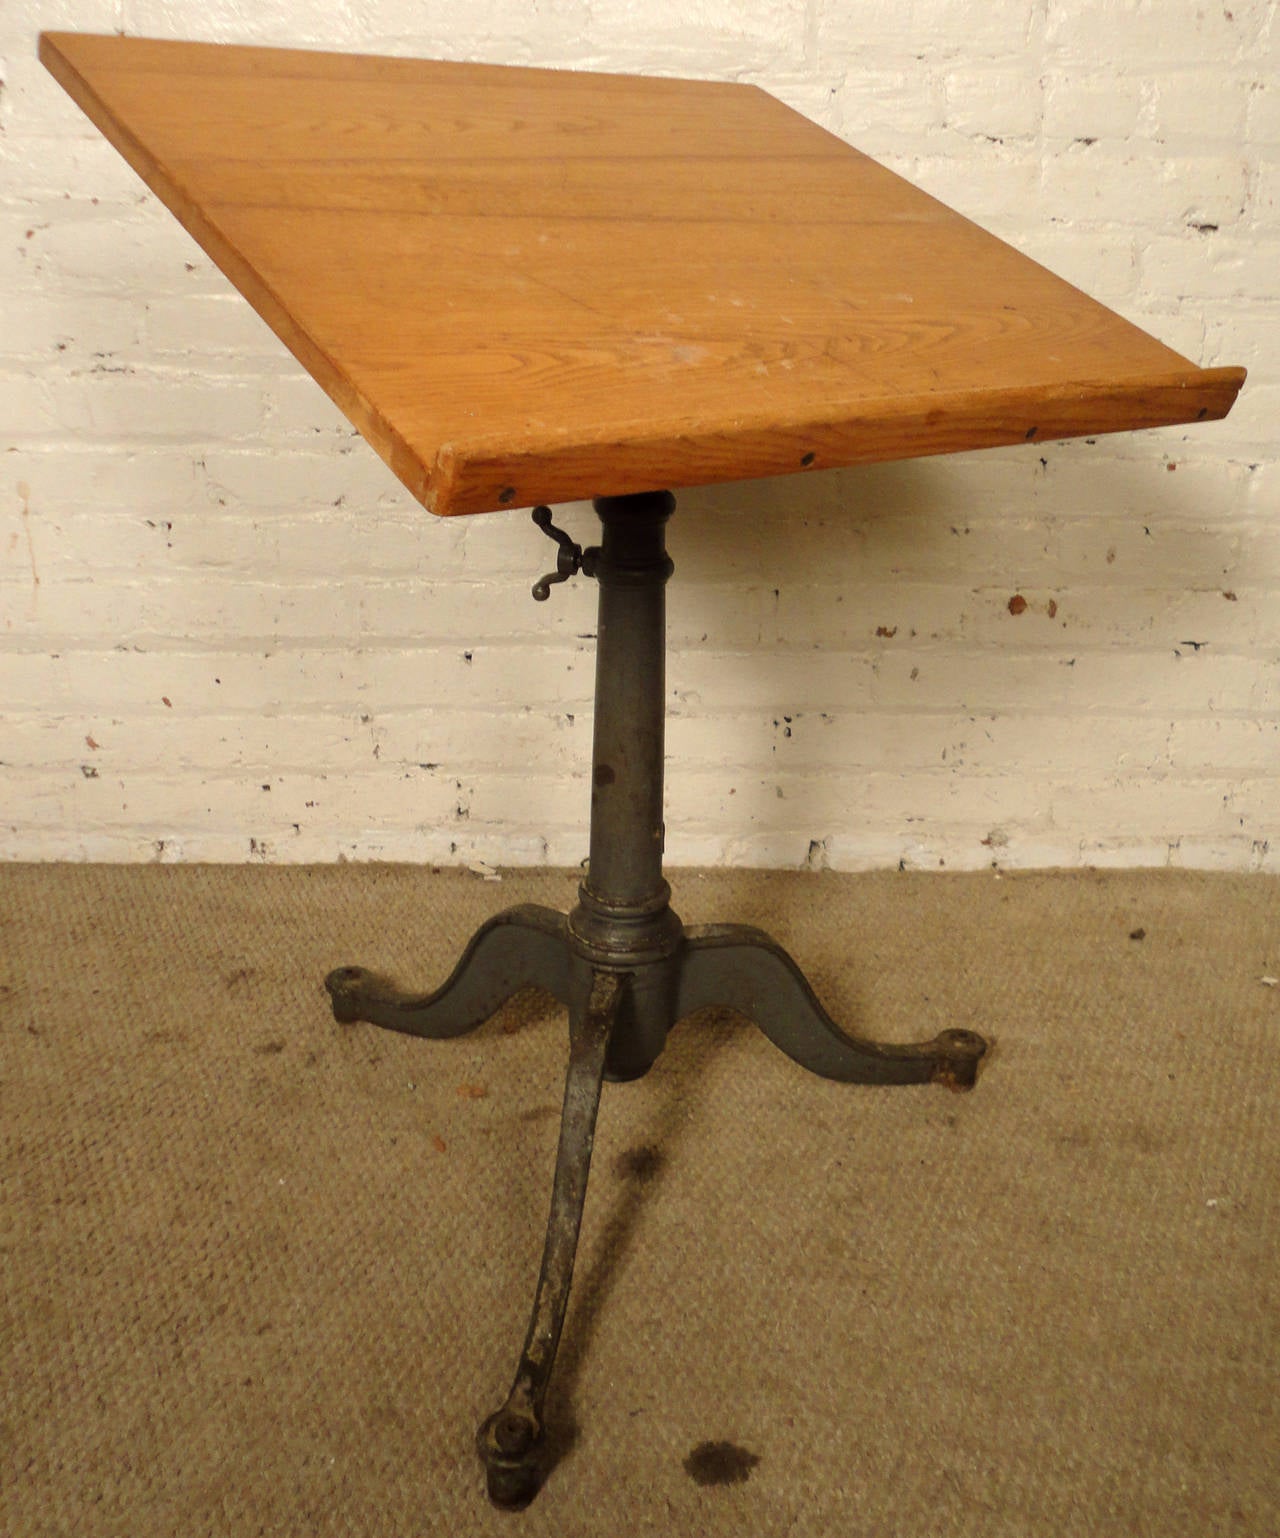 Vintage college drafting table manufactured by The Keuffel & Esser Company, also known as K&E. A drafting and supplies company founded in 1867, the first American company to specialize in these products.
Adjustable height 38"/51"